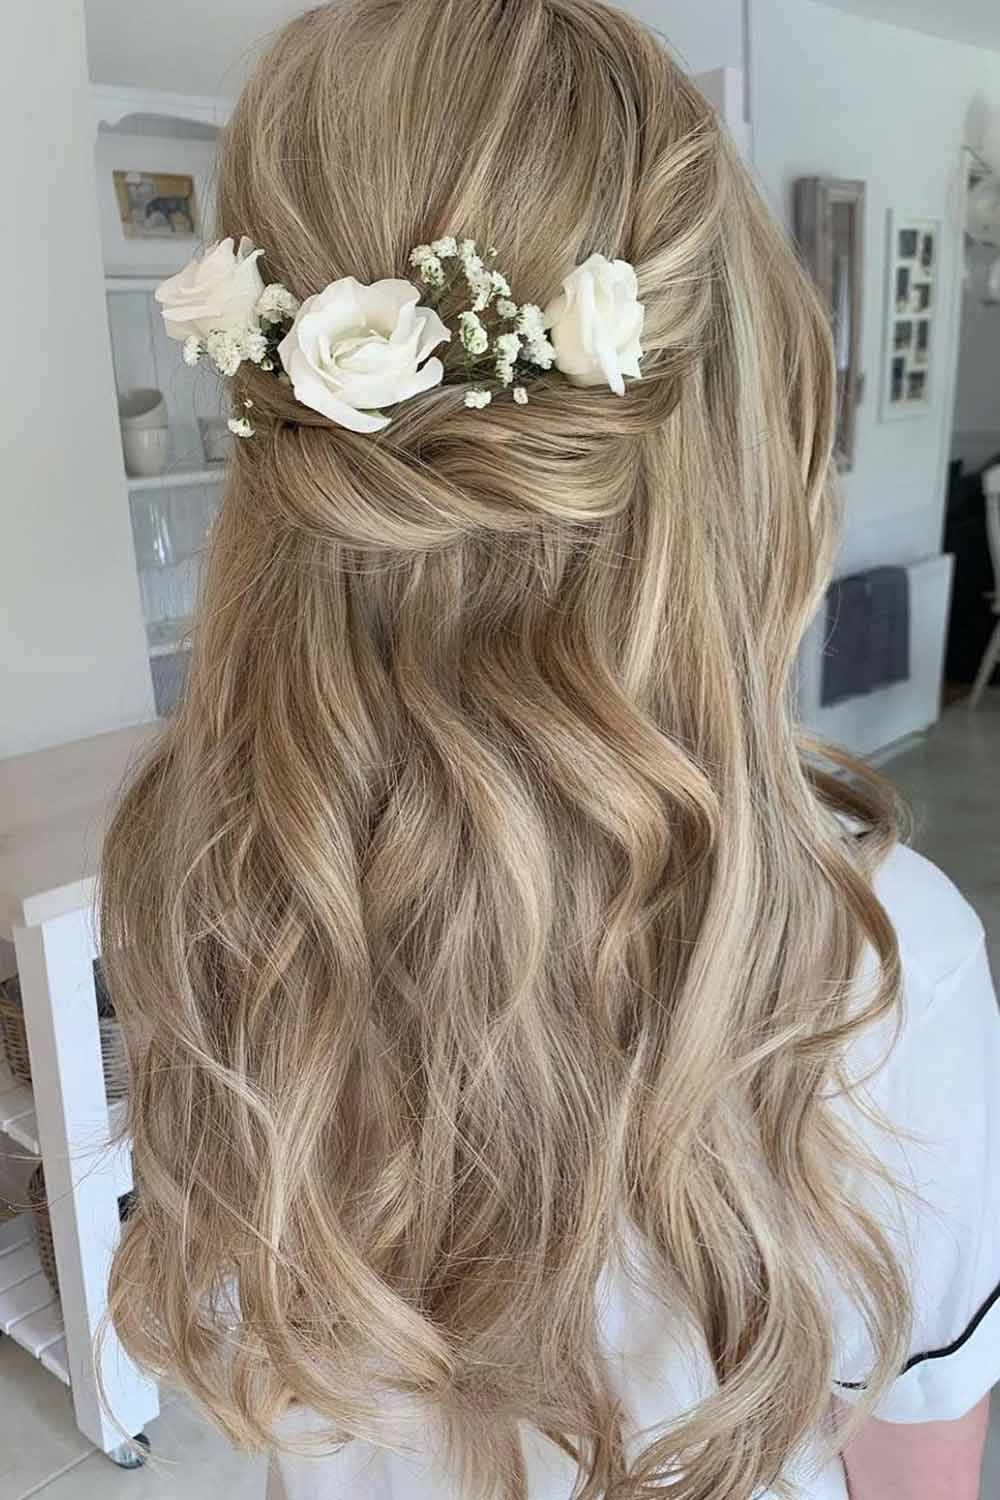 Wavy Half Up with Floral Accessory